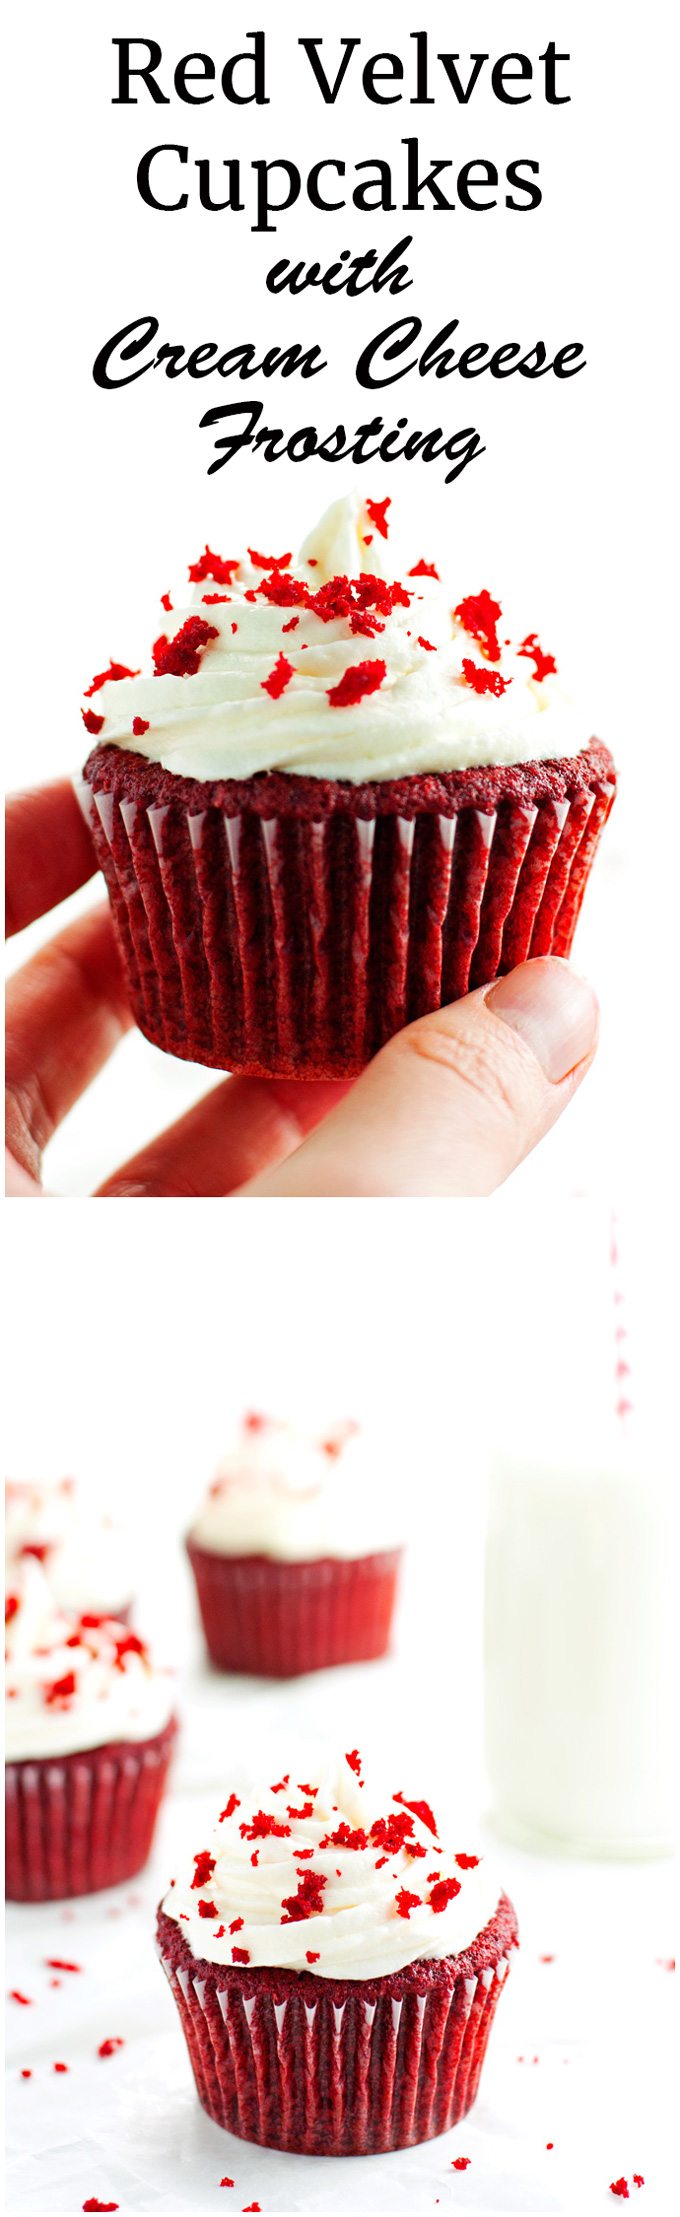 red velvet cupcakes topped with cream cheese frosting and cupcake crumbs. Ready to eat with a jug of ice cold milk